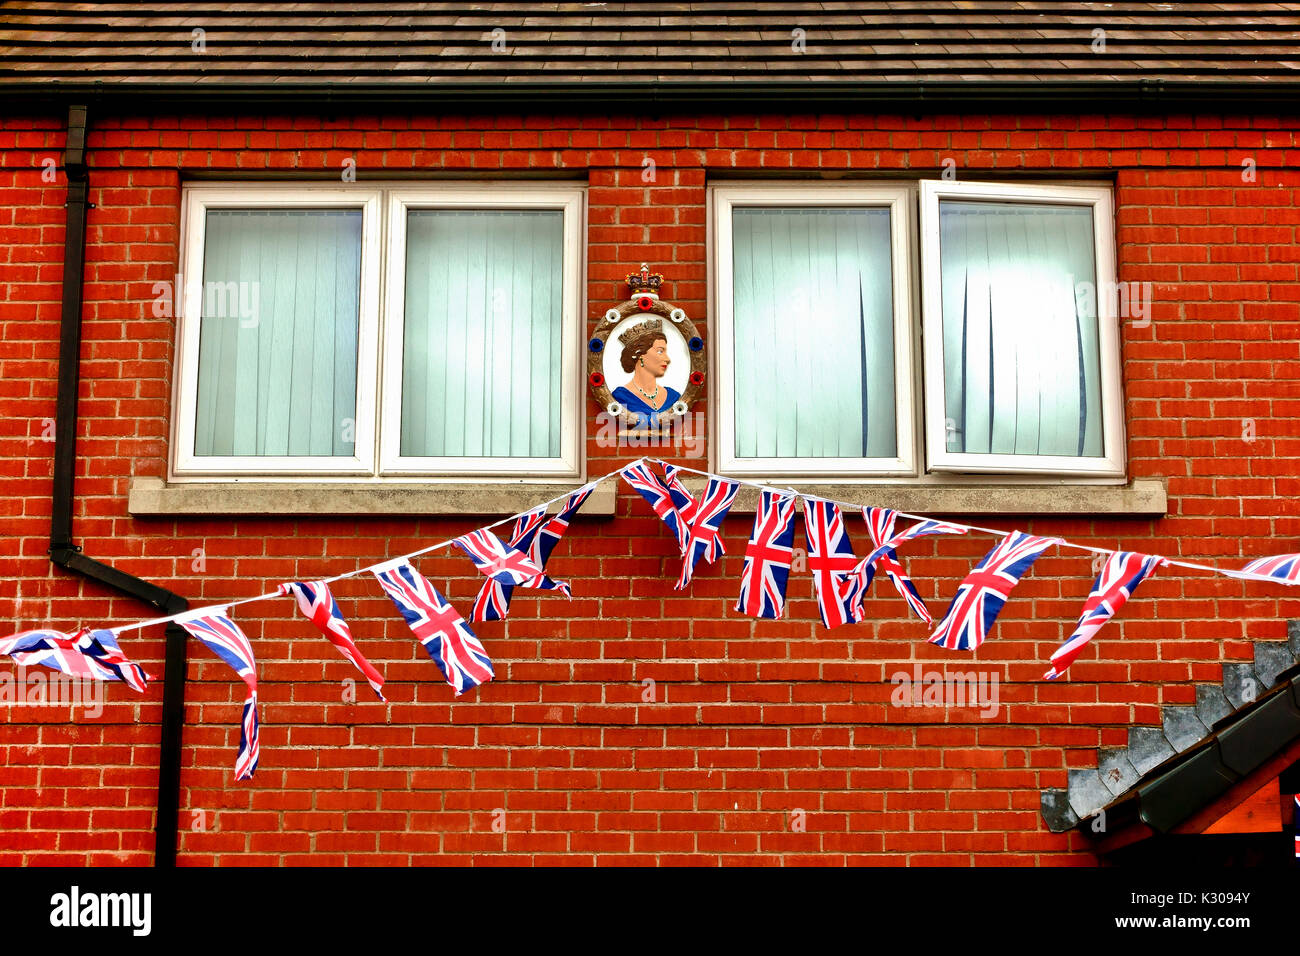 Terrace of a unionist house decorated with Union Jack flags and Queen Elizabeth II painting. Belfast, Northern Ireland, United Kingdom, UK, Europe Stock Photo